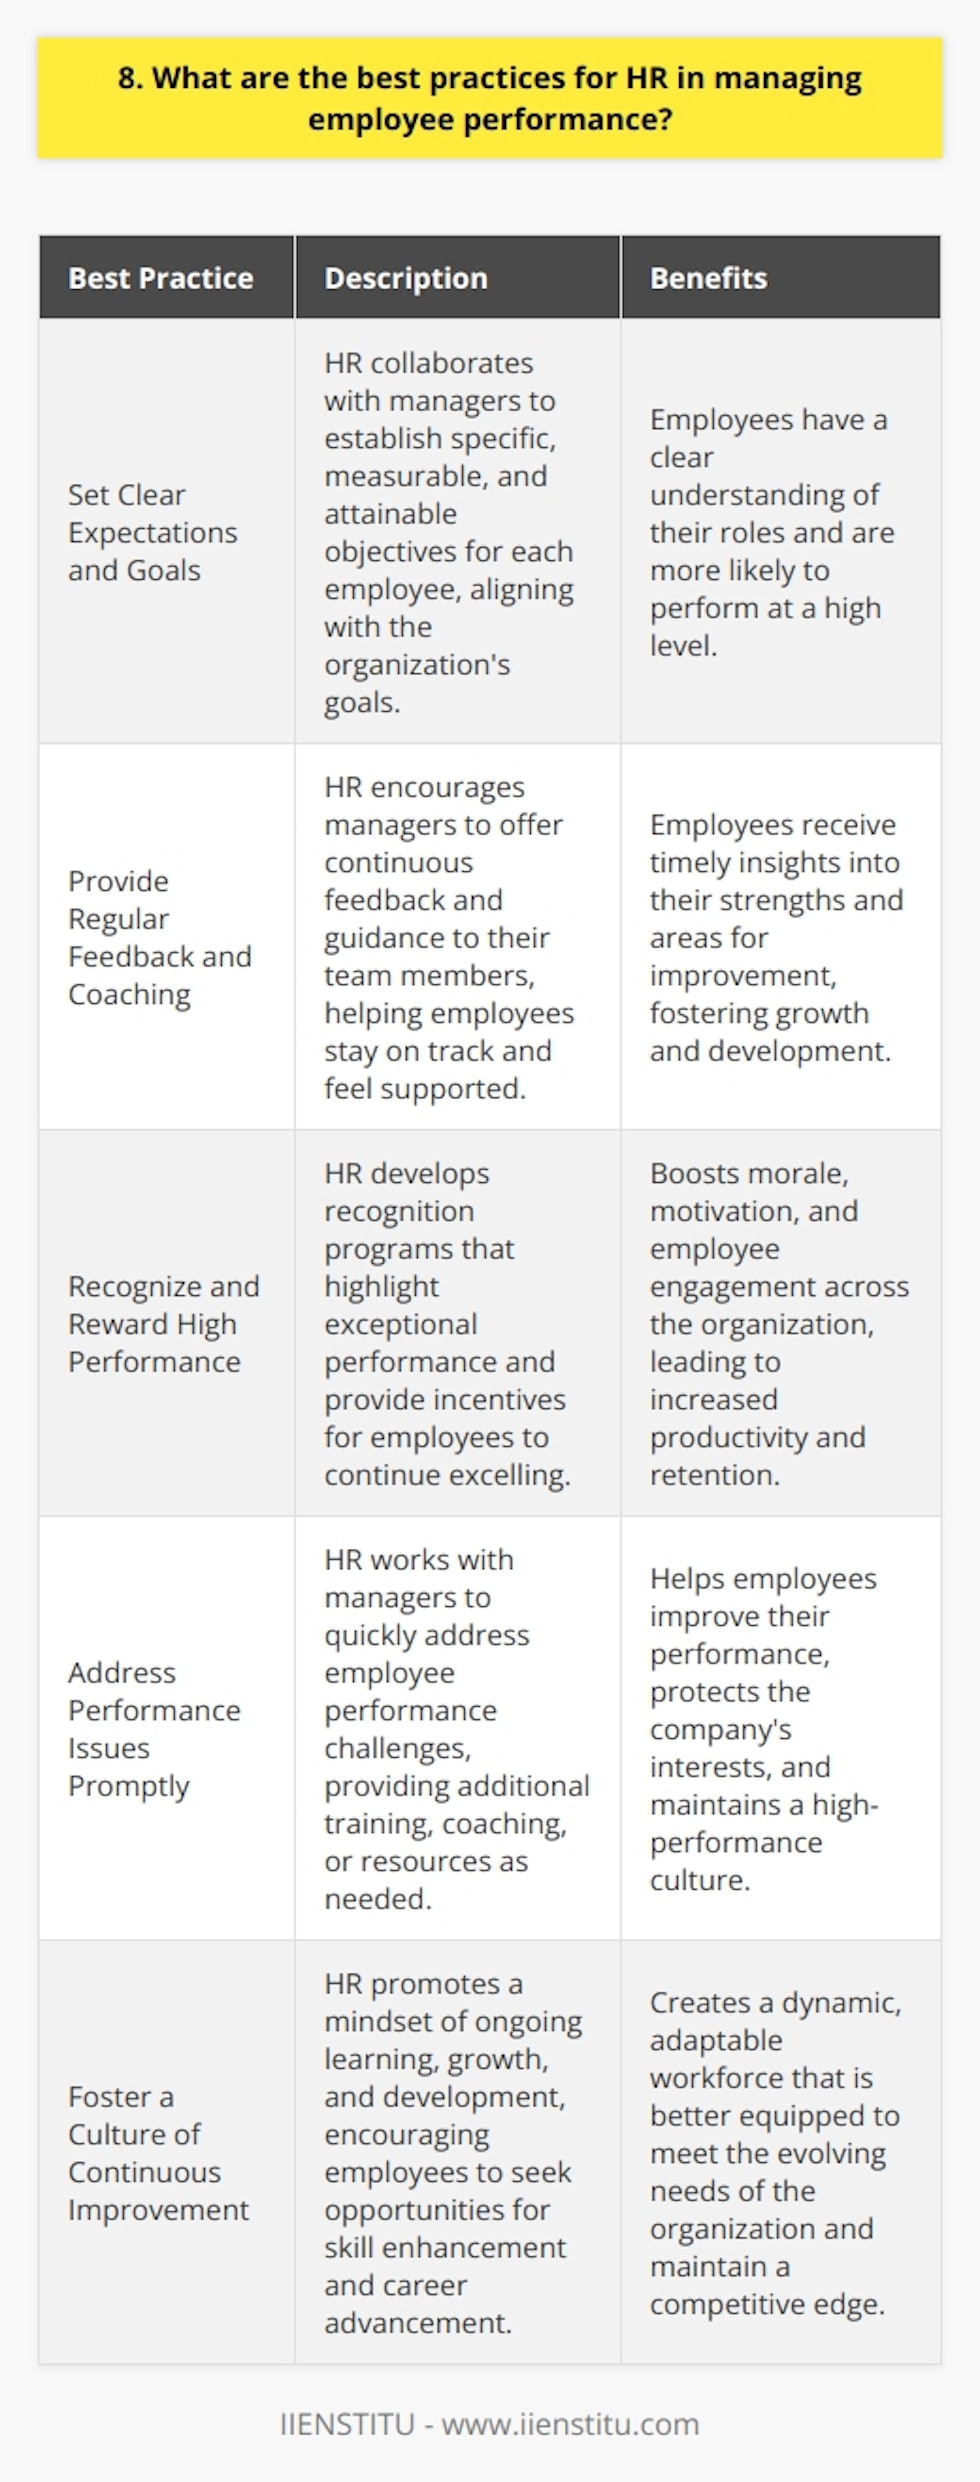 As an HR professional, I believe that effective employee performance management is crucial for organizational success. In my experience, there are several best practices that HR should follow to optimize employee performance. Set Clear Expectations and Goals HR should work with managers to establish clear, measurable, and achievable goals for each employee. These goals should align with the companys overall objectives and be communicated to employees regularly. When employees understand what is expected of them, they are more likely to perform at a high level. Provide Regular Feedback and Coaching Employees need regular feedback on their performance to know what theyre doing well and where they need to improve. HR should encourage managers to provide ongoing feedback and coaching to their team members. This helps employees stay on track and feel supported in their development. Recognize and Reward High Performance When employees go above and beyond, its important to recognize and reward their efforts. HR can develop recognition programs that highlight exceptional performance and provide incentives for employees to continue excelling. This can boost morale and motivation across the organization. Address Performance Issues Promptly If an employee is struggling with performance, HR should work with their manager to address the issue quickly. This may involve providing additional training, coaching, or resources to help the employee improve. In some cases, disciplinary action may be necessary to correct behavior or protect the companys interests. By following these best practices, HR can create a culture of high performance and employee engagement. It takes ongoing effort and collaboration with managers, but the results are well worth it in terms of productivity, retention, and overall business success.